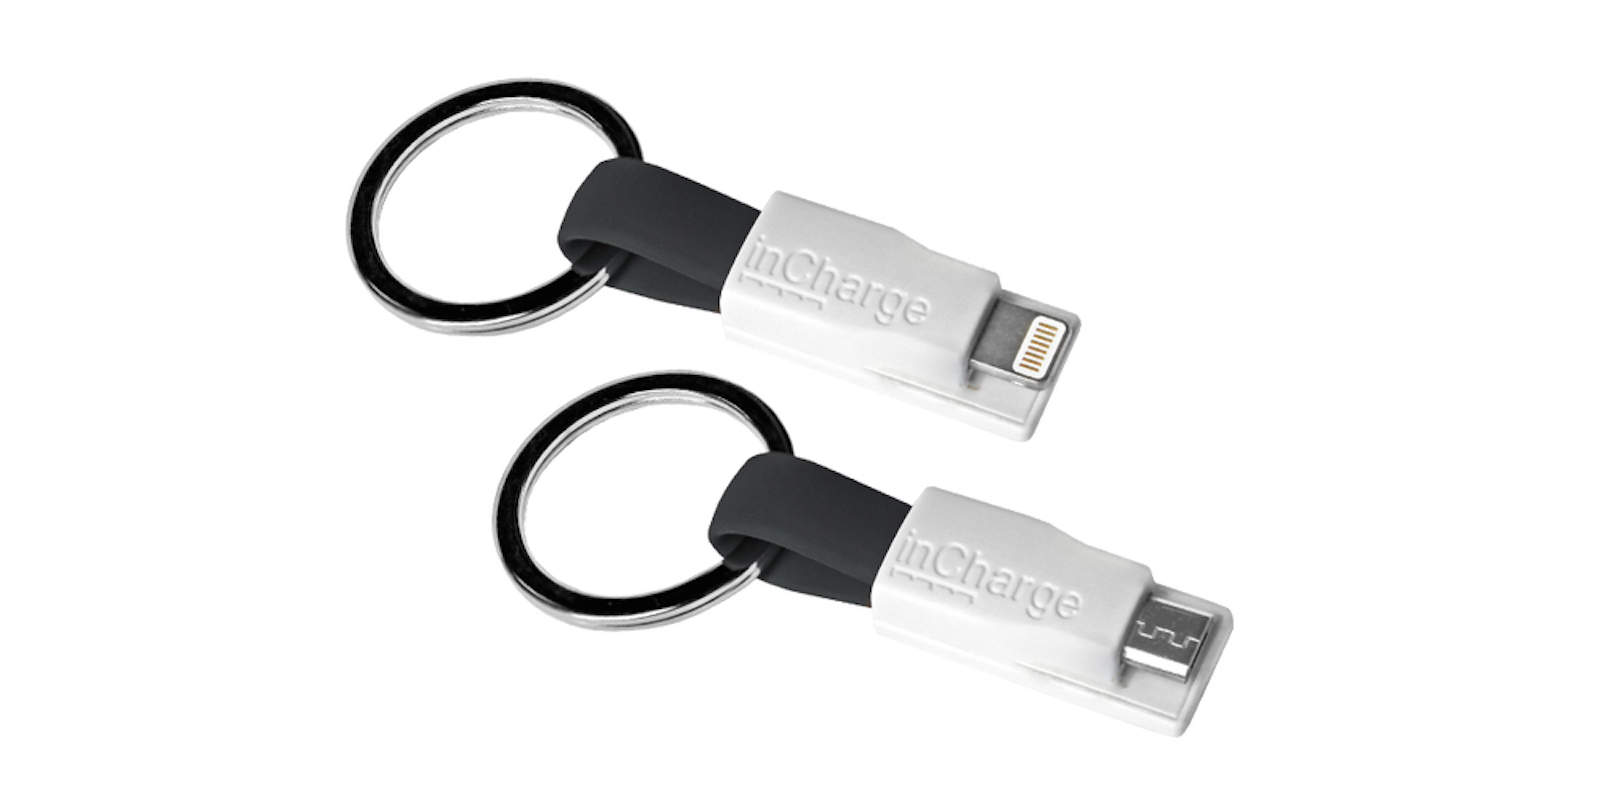 inCharge puts a Lightning cable right on your keychain.